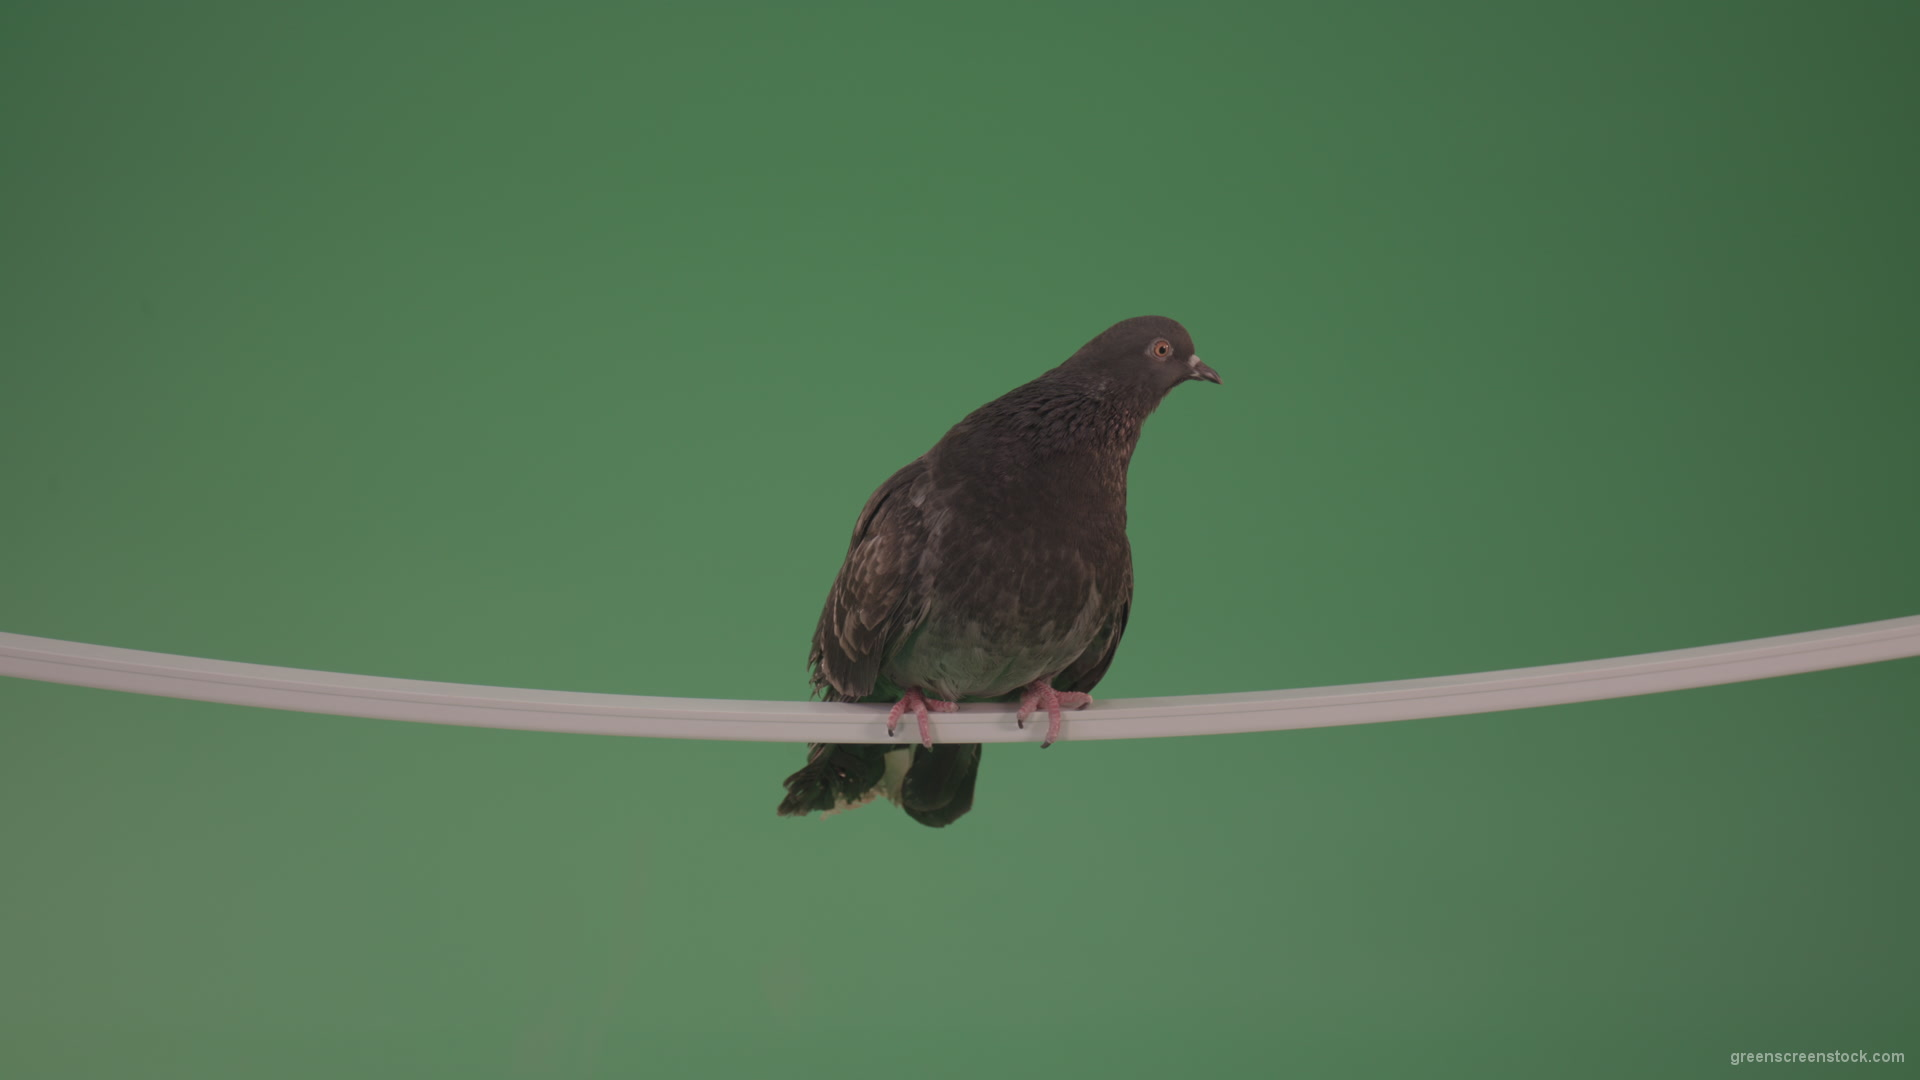 Bird-of-gray-color-doves-flies-from-branch-to-heaven-isolated-on-chromakey-background_004 Green Screen Stock